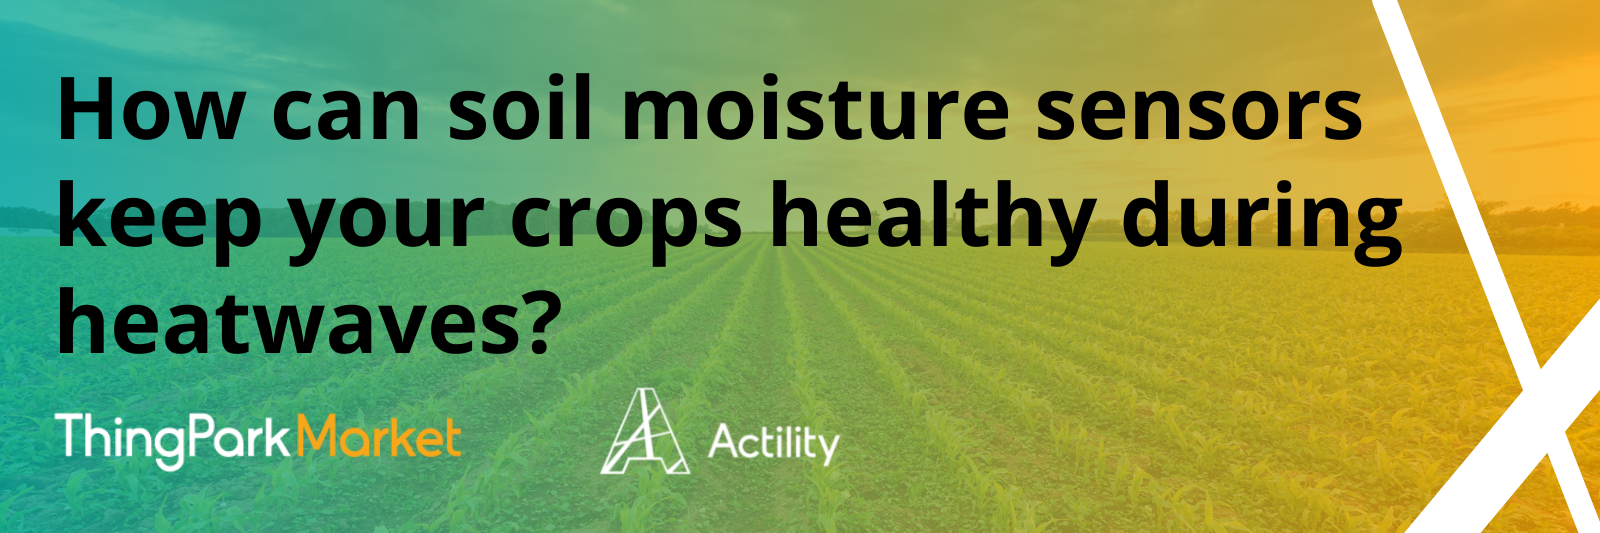 How Can Soil Moisture Sensors Keep Your Crops Healthy During Heatwaves? 